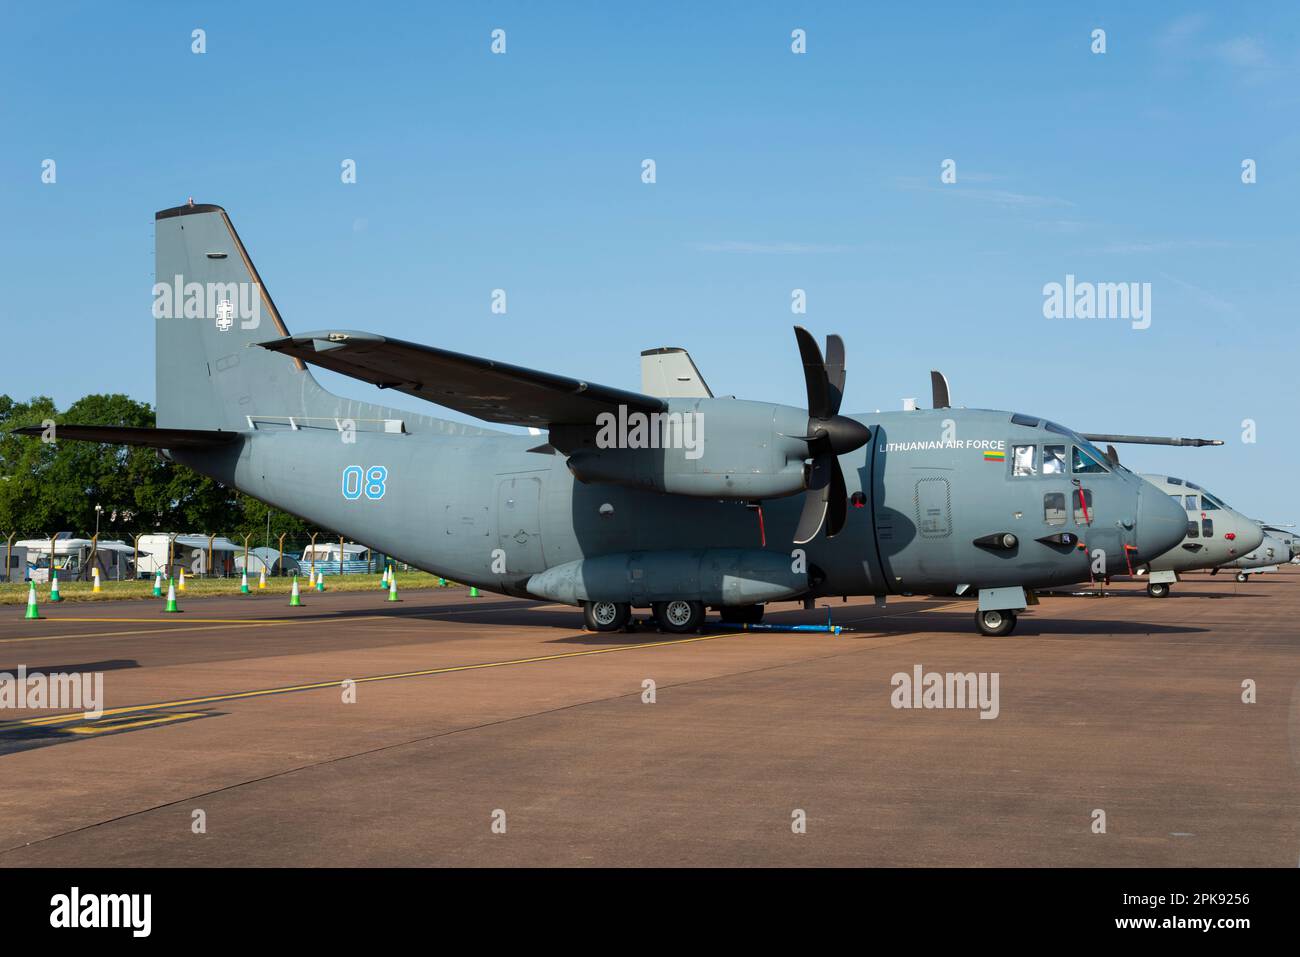 Lithuanian Air Force Alenia C-27J Spartan transport plane 08 on display at Royal International Air Tattoo airshow, RAF Fairford, UK. NATO transport Stock Photo